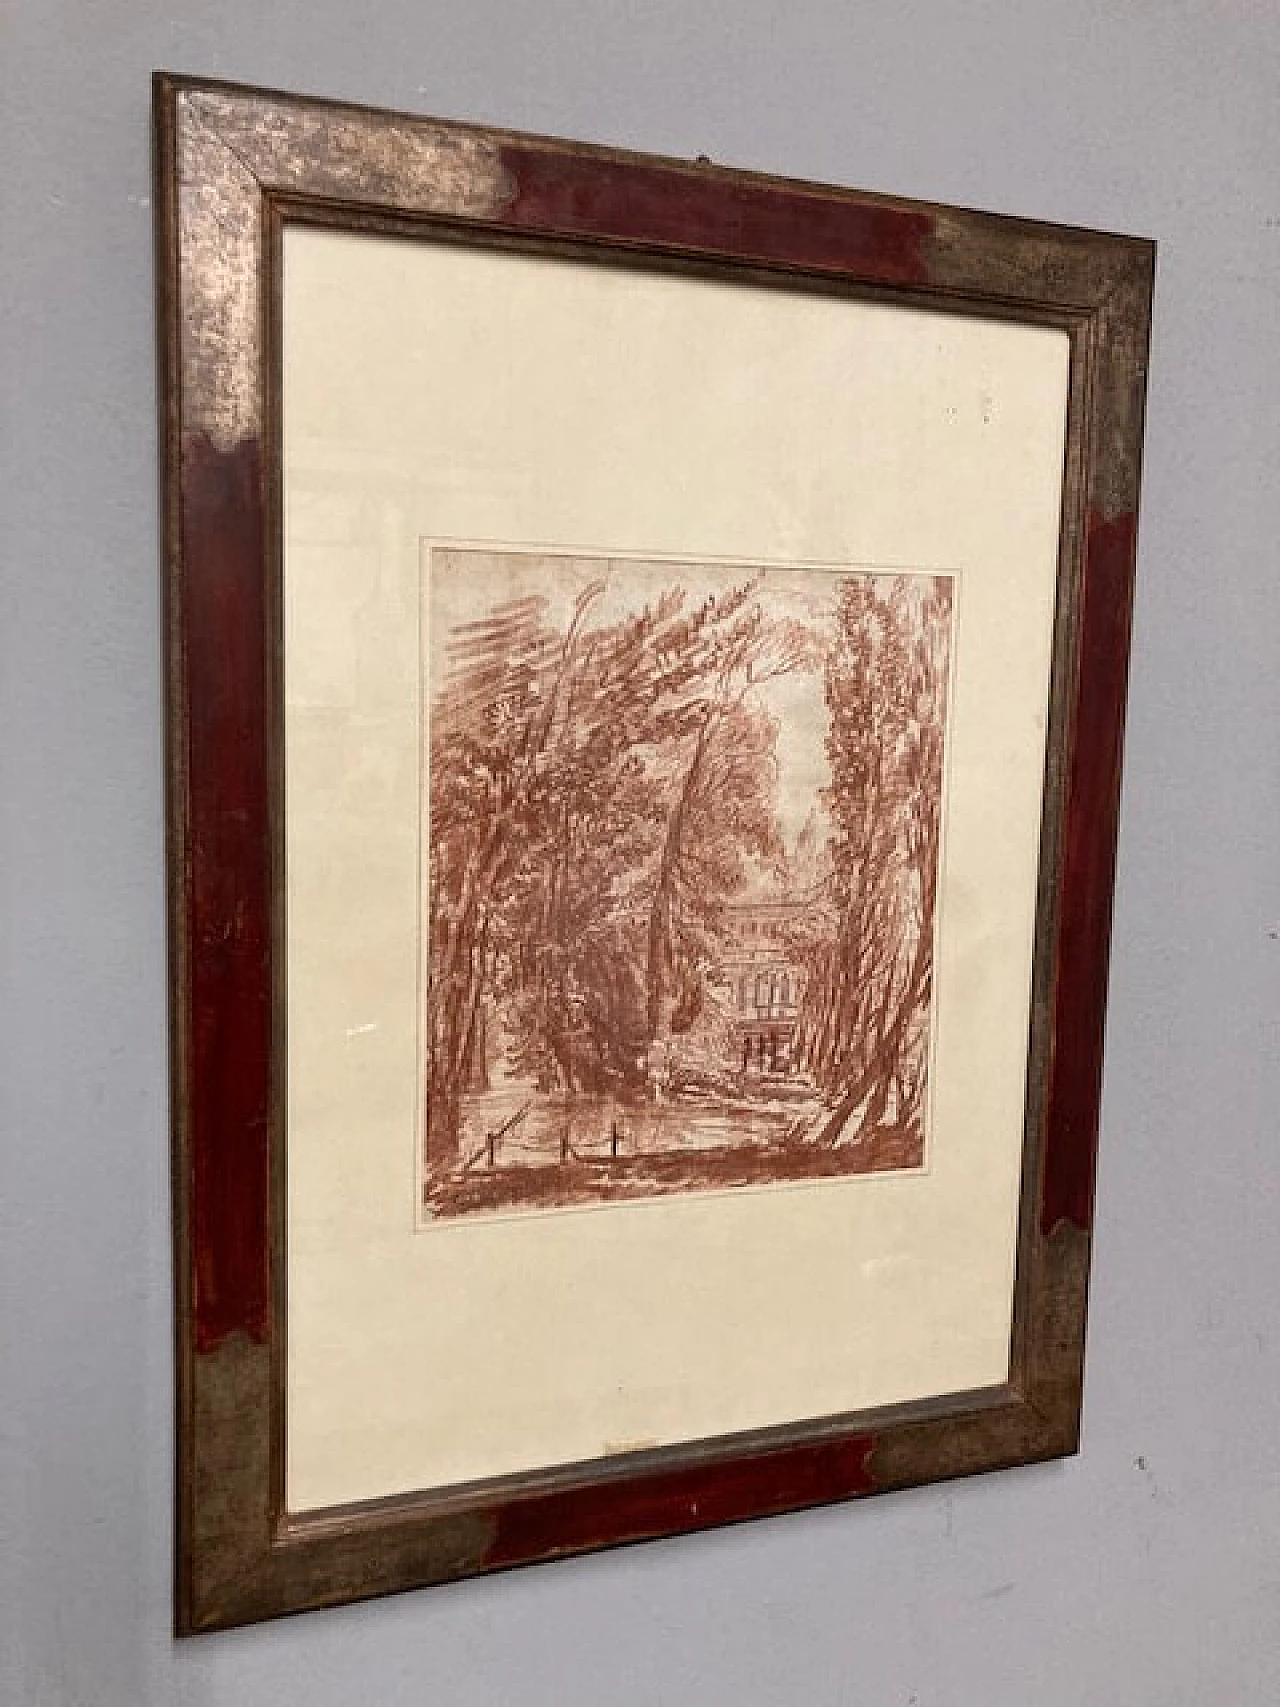 Sanguine pencil drawing of landscape, mid-19th century 1